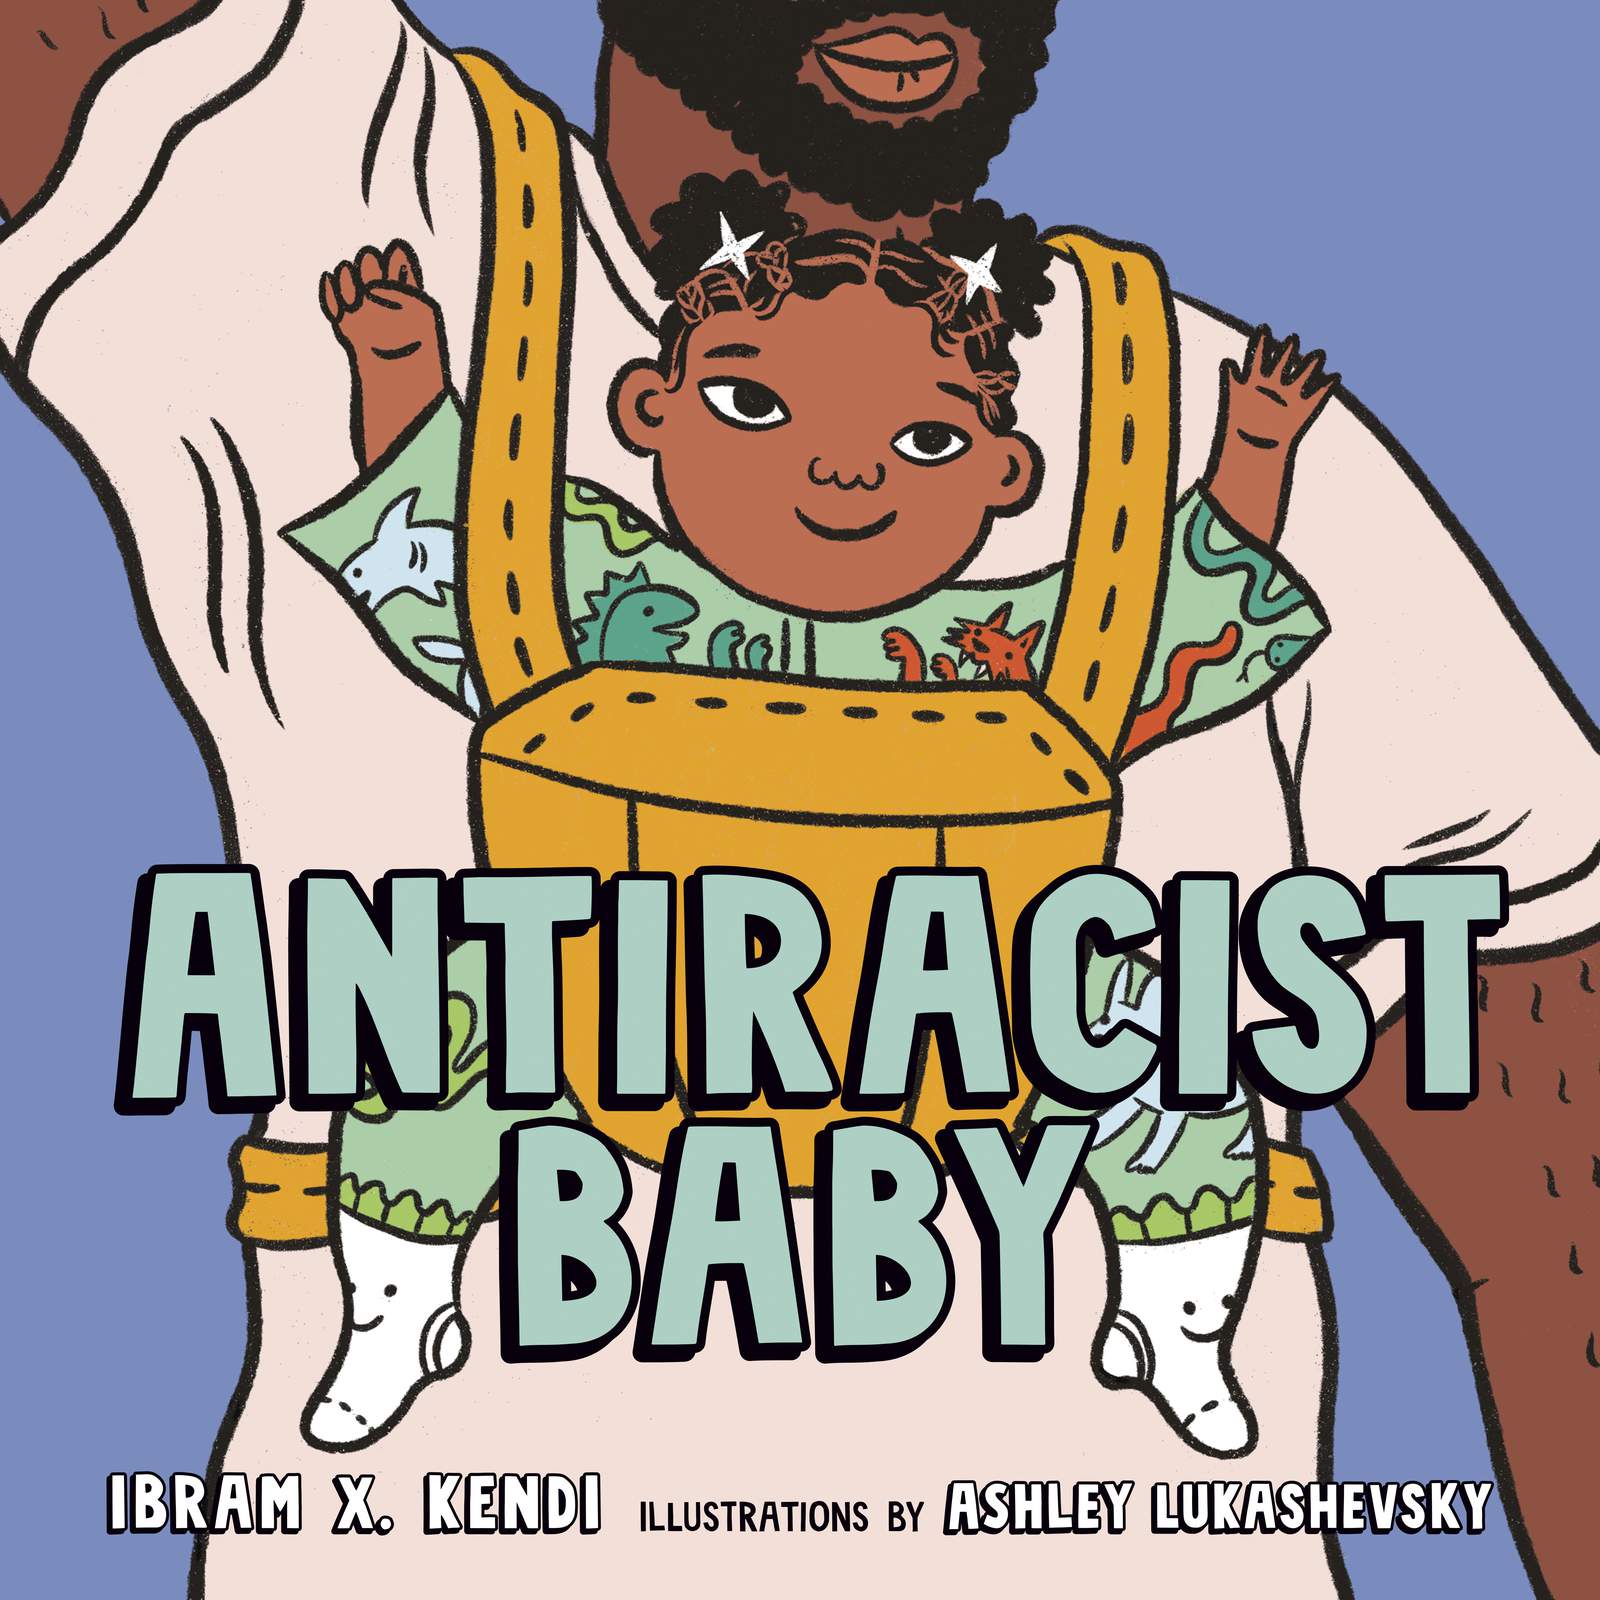 Top seller 'Antiracist Baby' to be released as picture book